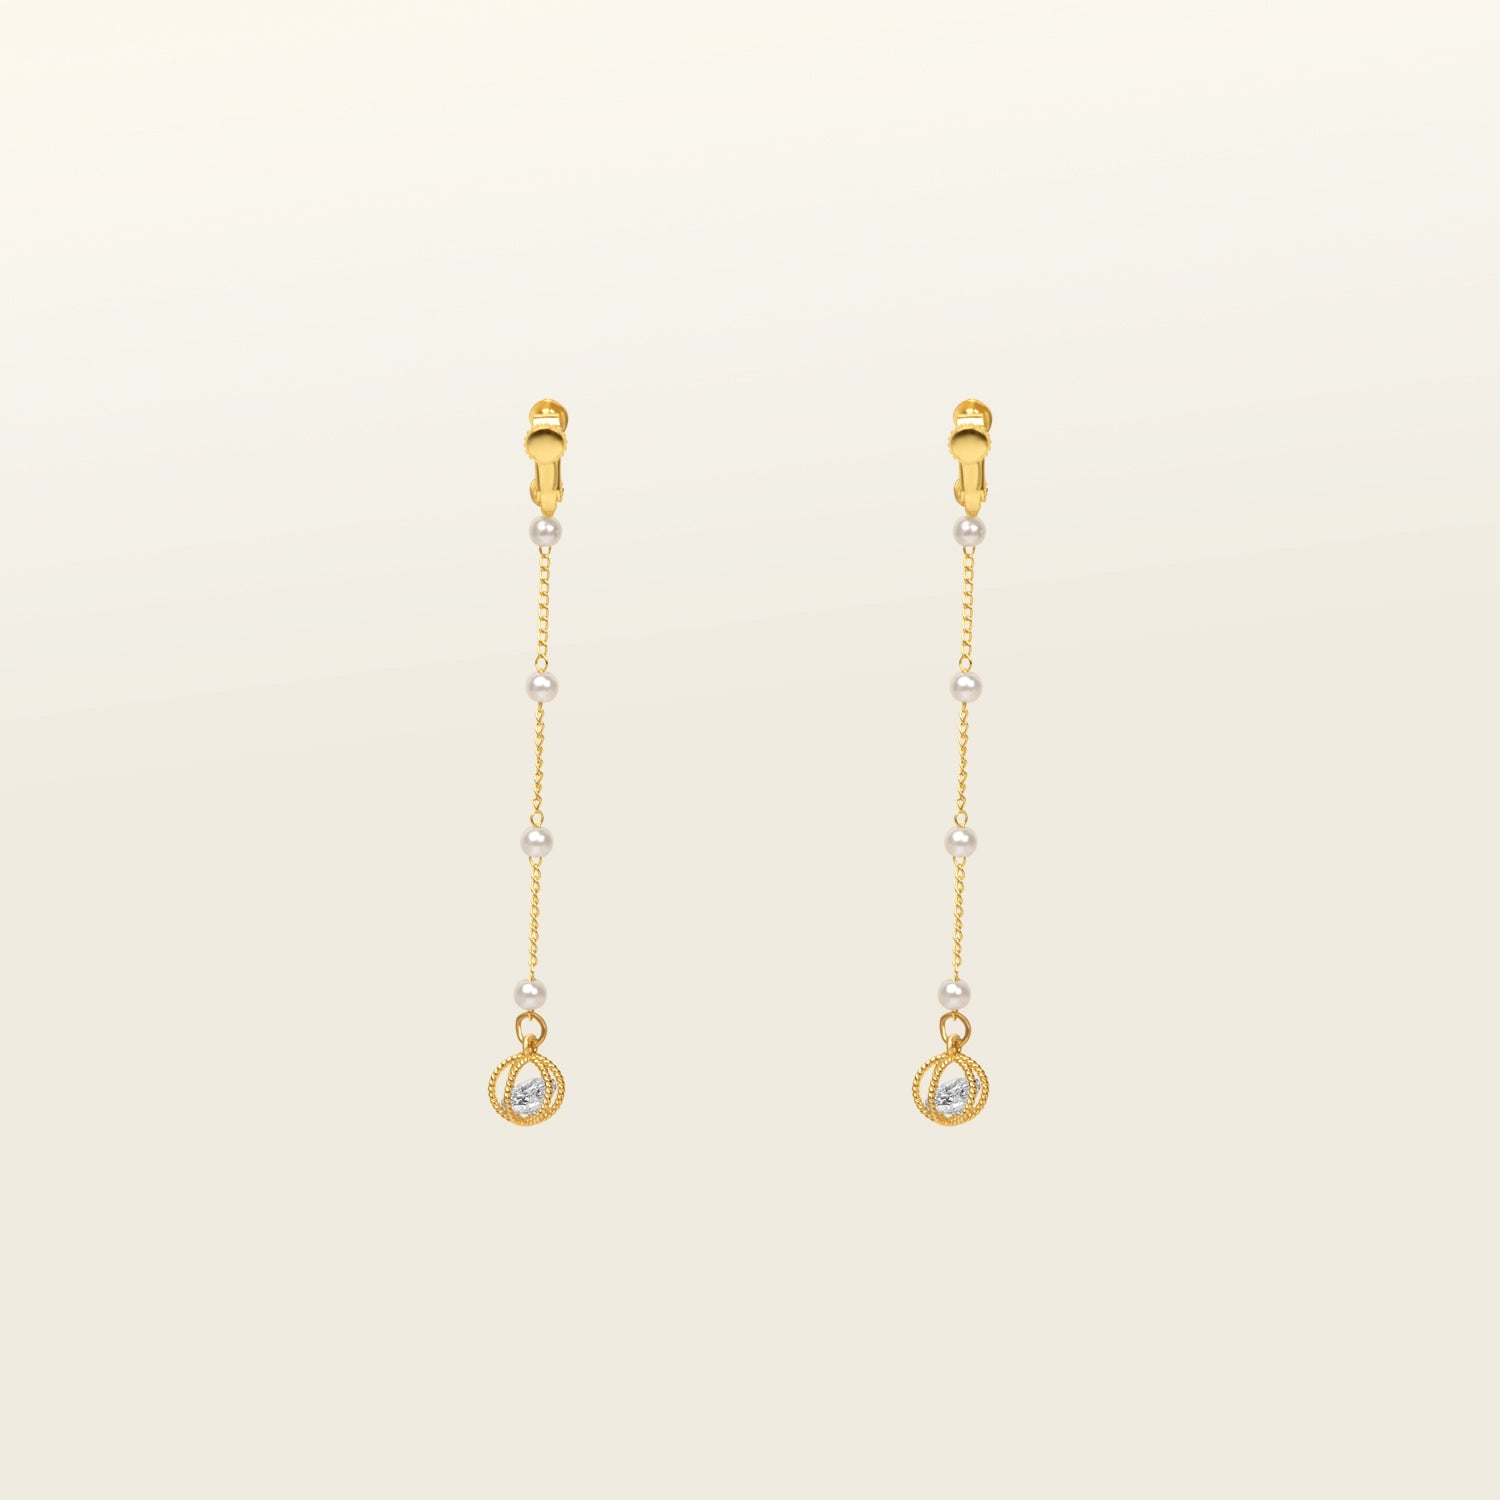 Image of the Pearl Drop Clip-On Earrings features a secure screw-back closure. Compatible with all ear types, these earrings provide a comfortable wear of 8-12 hours and offer an adjustable hold strength. Constructed with gold-tone plated metal alloy and a faux pearl, this single pair of earrings is sure to become a favorite.